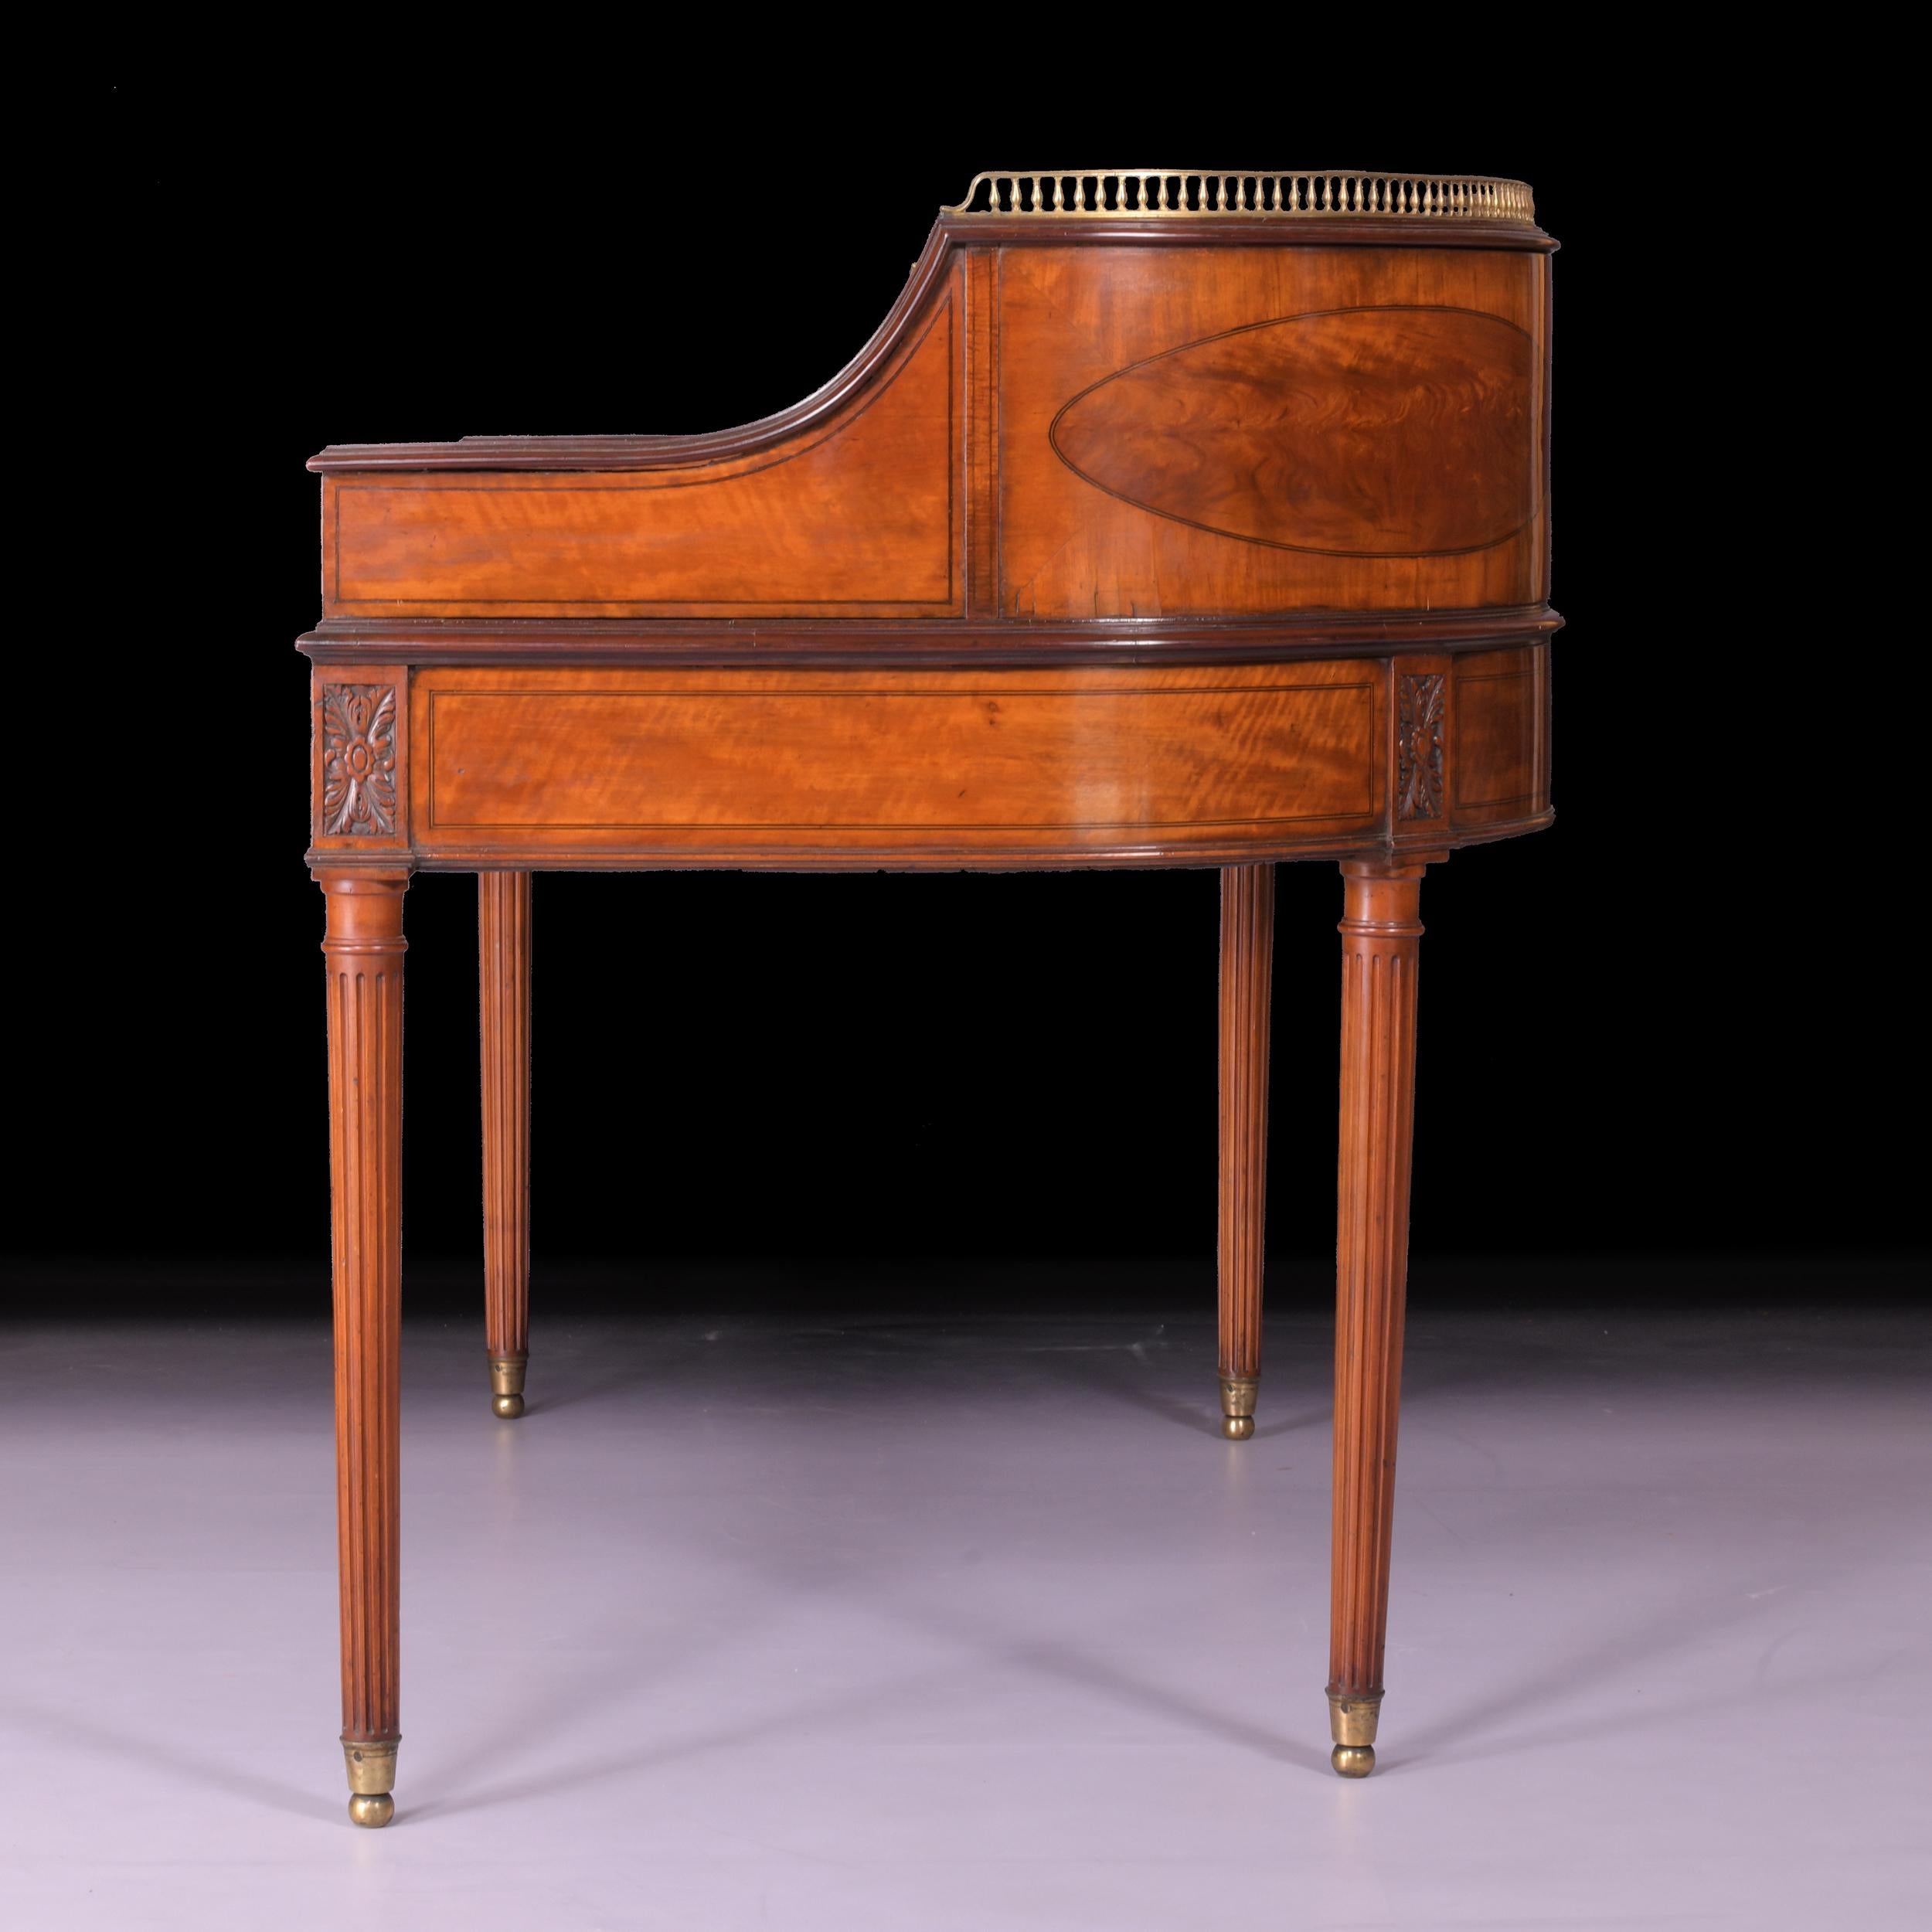 Georgian 19th Century English Satinwood Carlton House Desk Attributed to Gillows For Sale